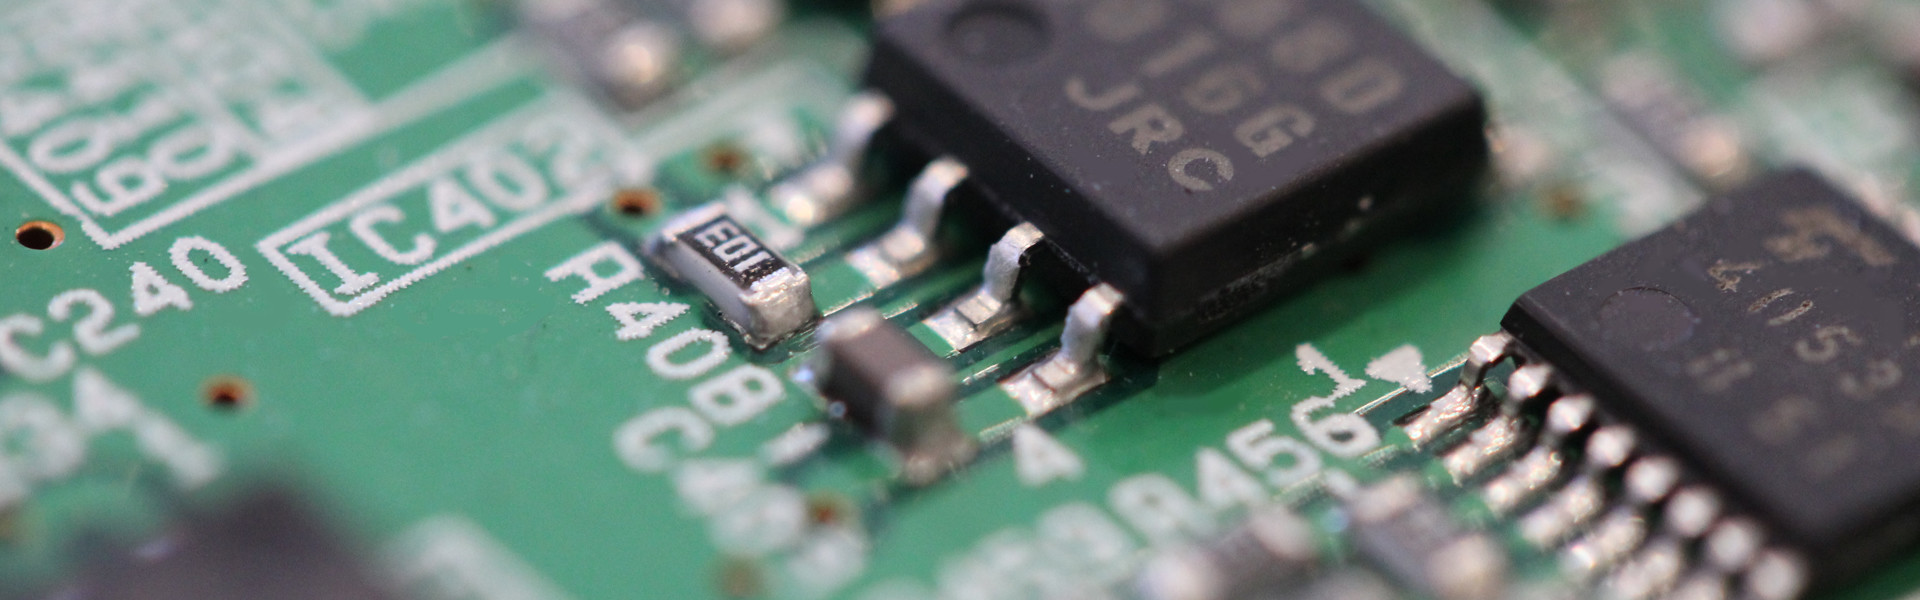 Header image for article New 5D Mark III Firmware Enables Clean HDMI Output